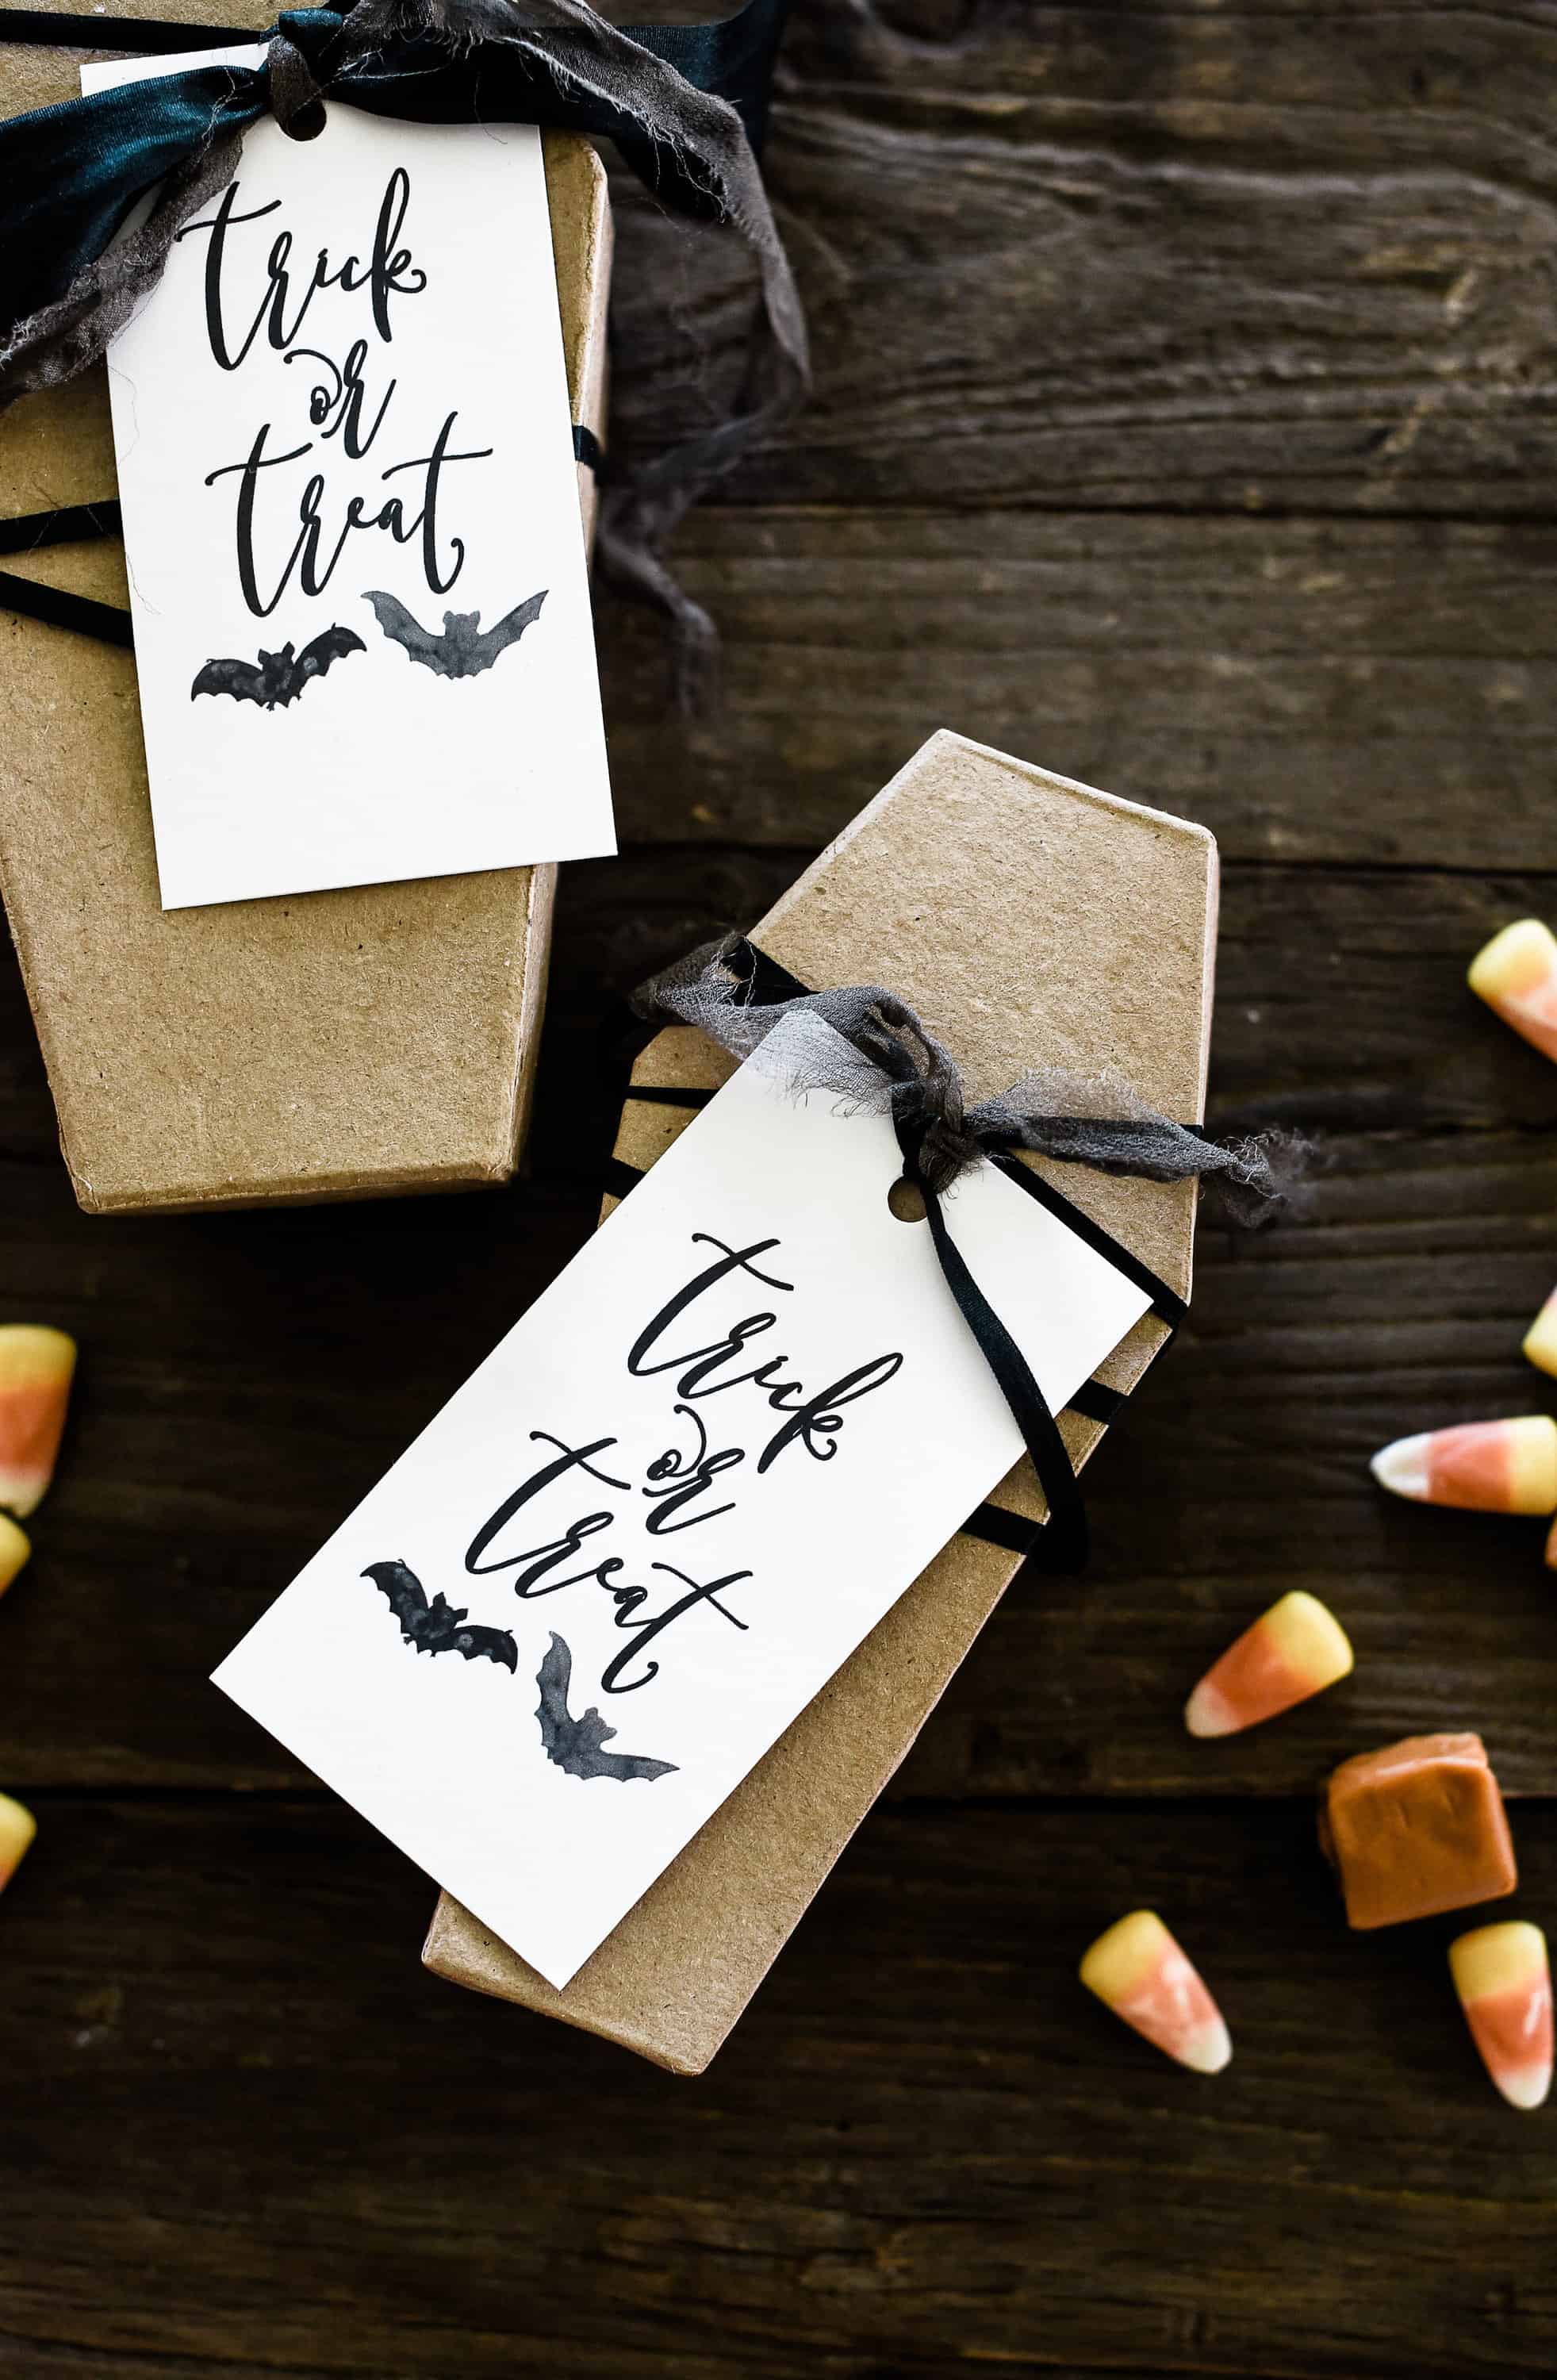 Decorate for Halloween this year with some of these easy (and free!) Halloween printables!